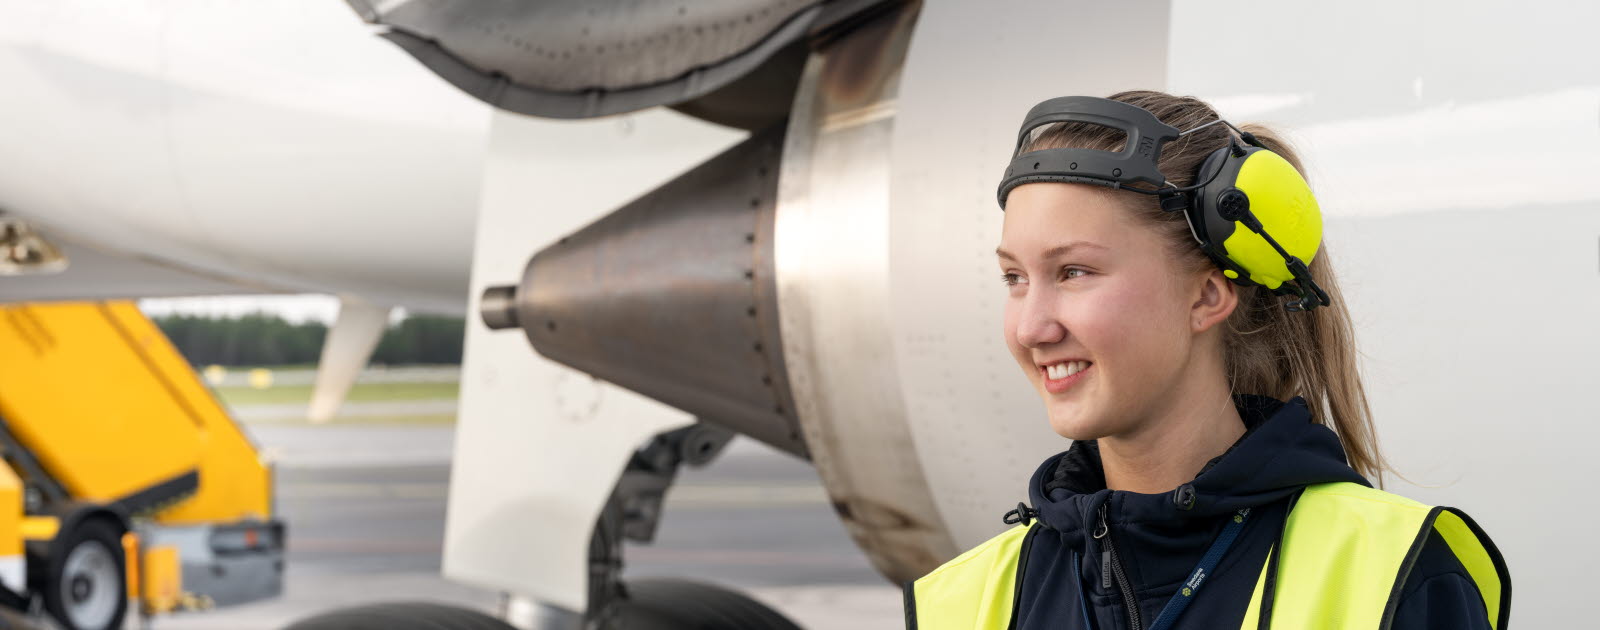 A female employee in front of an aircraft engine